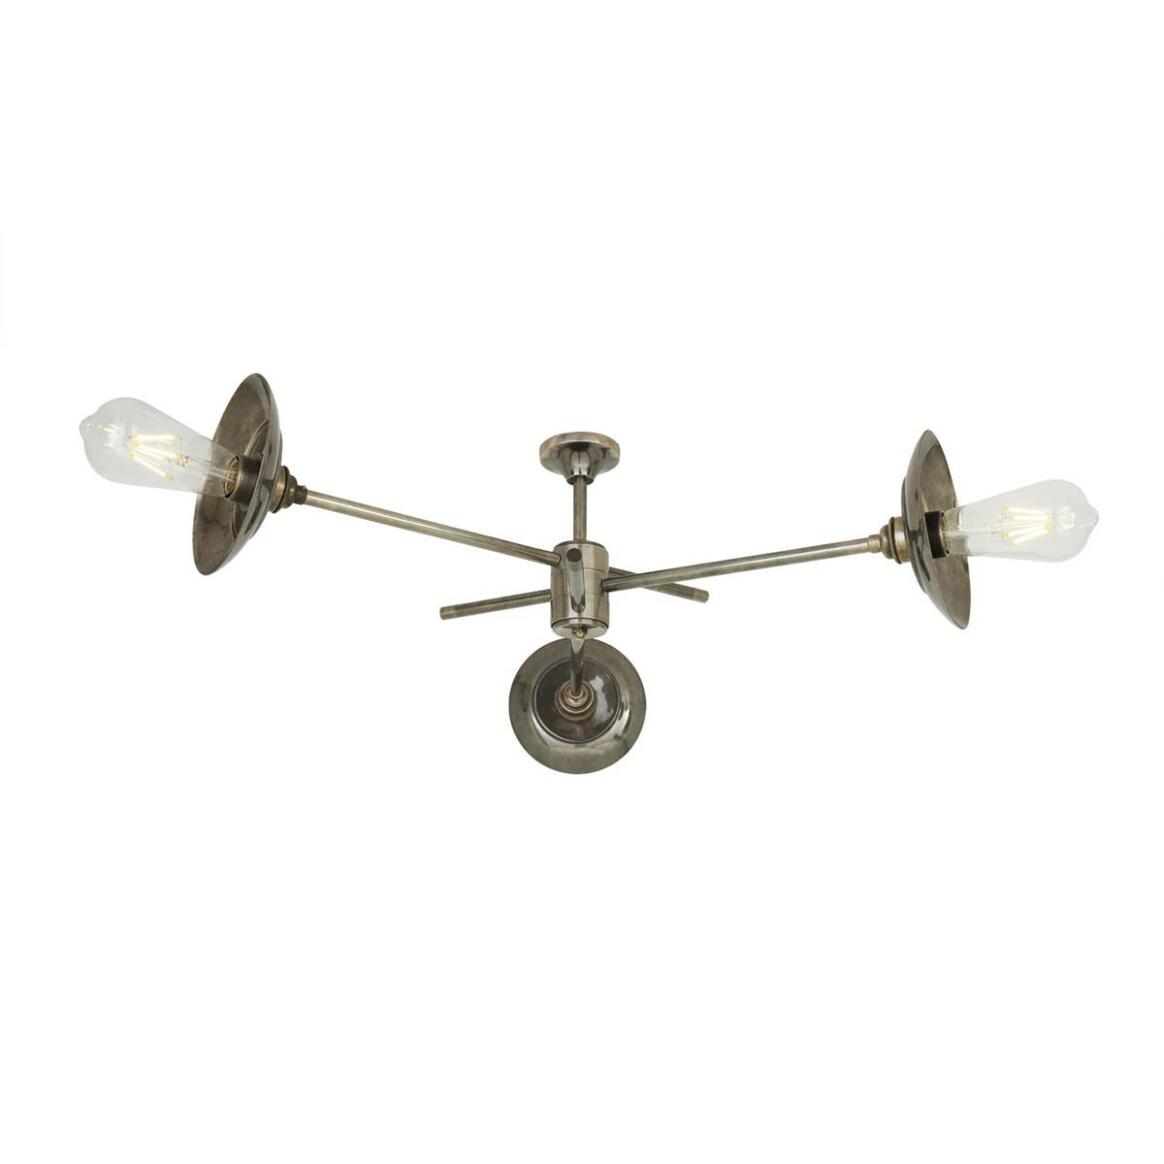 Reznor Industrial Flush Chandelier, Three-Arm main product image